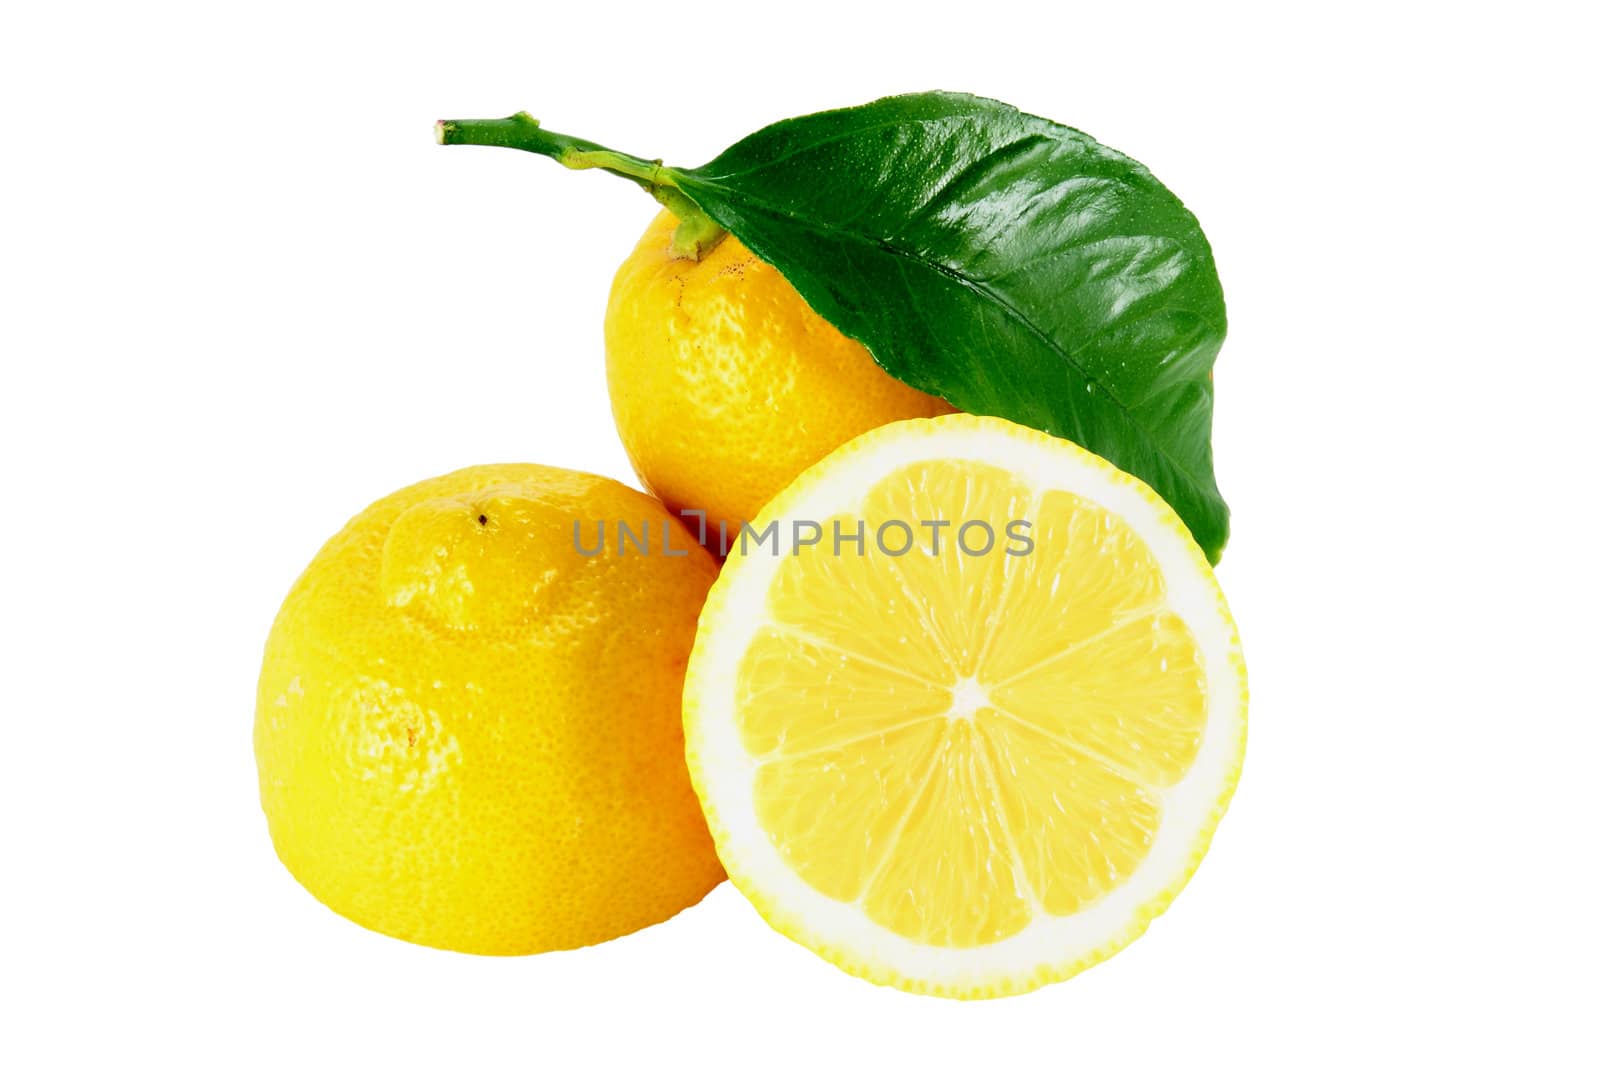 cut lemons on white background with work path